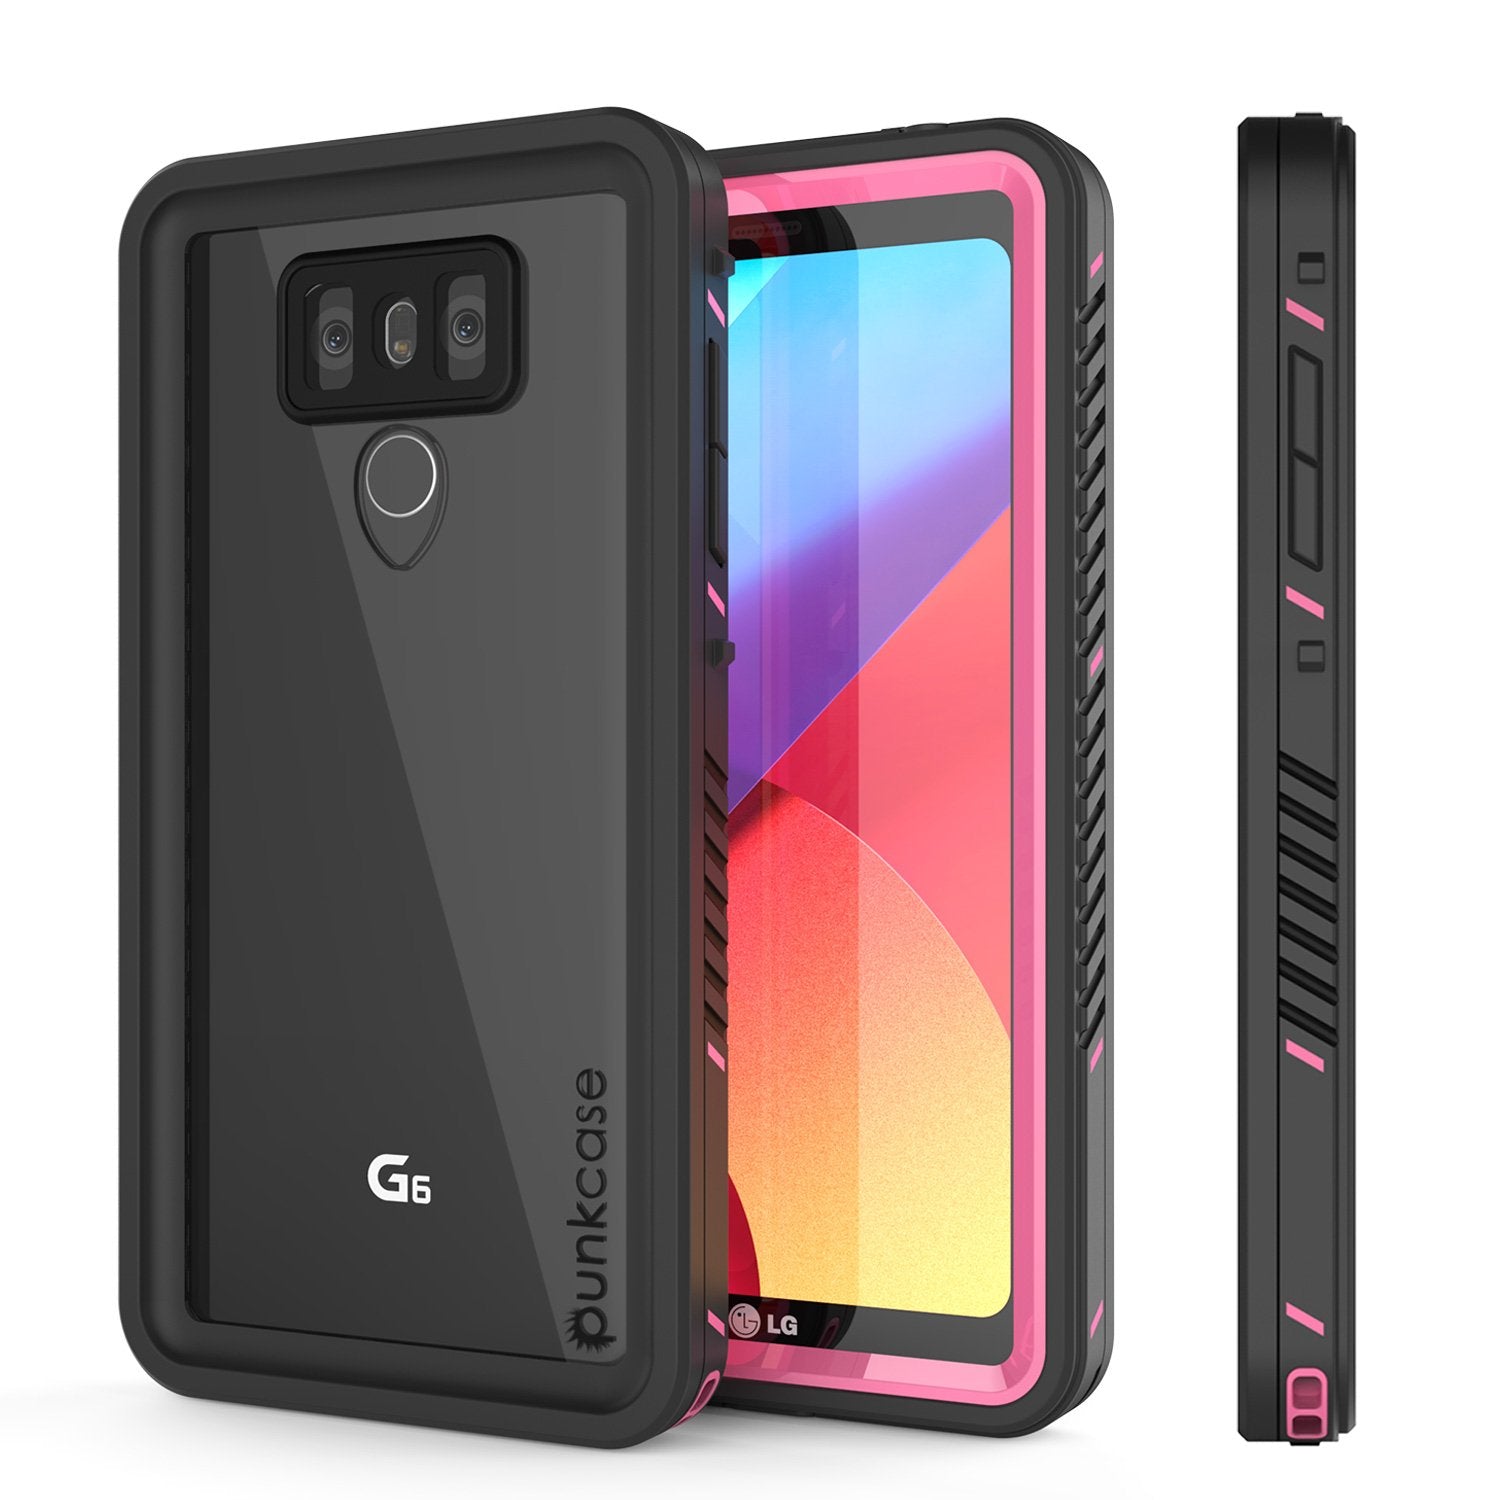 LG G6 Waterproof Case, Punkcase [Extreme Series] [Slim Fit] [IP68 Certified] [Shockproof] [Snowproof] [Dirproof] Armor Cover W/ Built In Screen Protector for LG G6 [PINK]